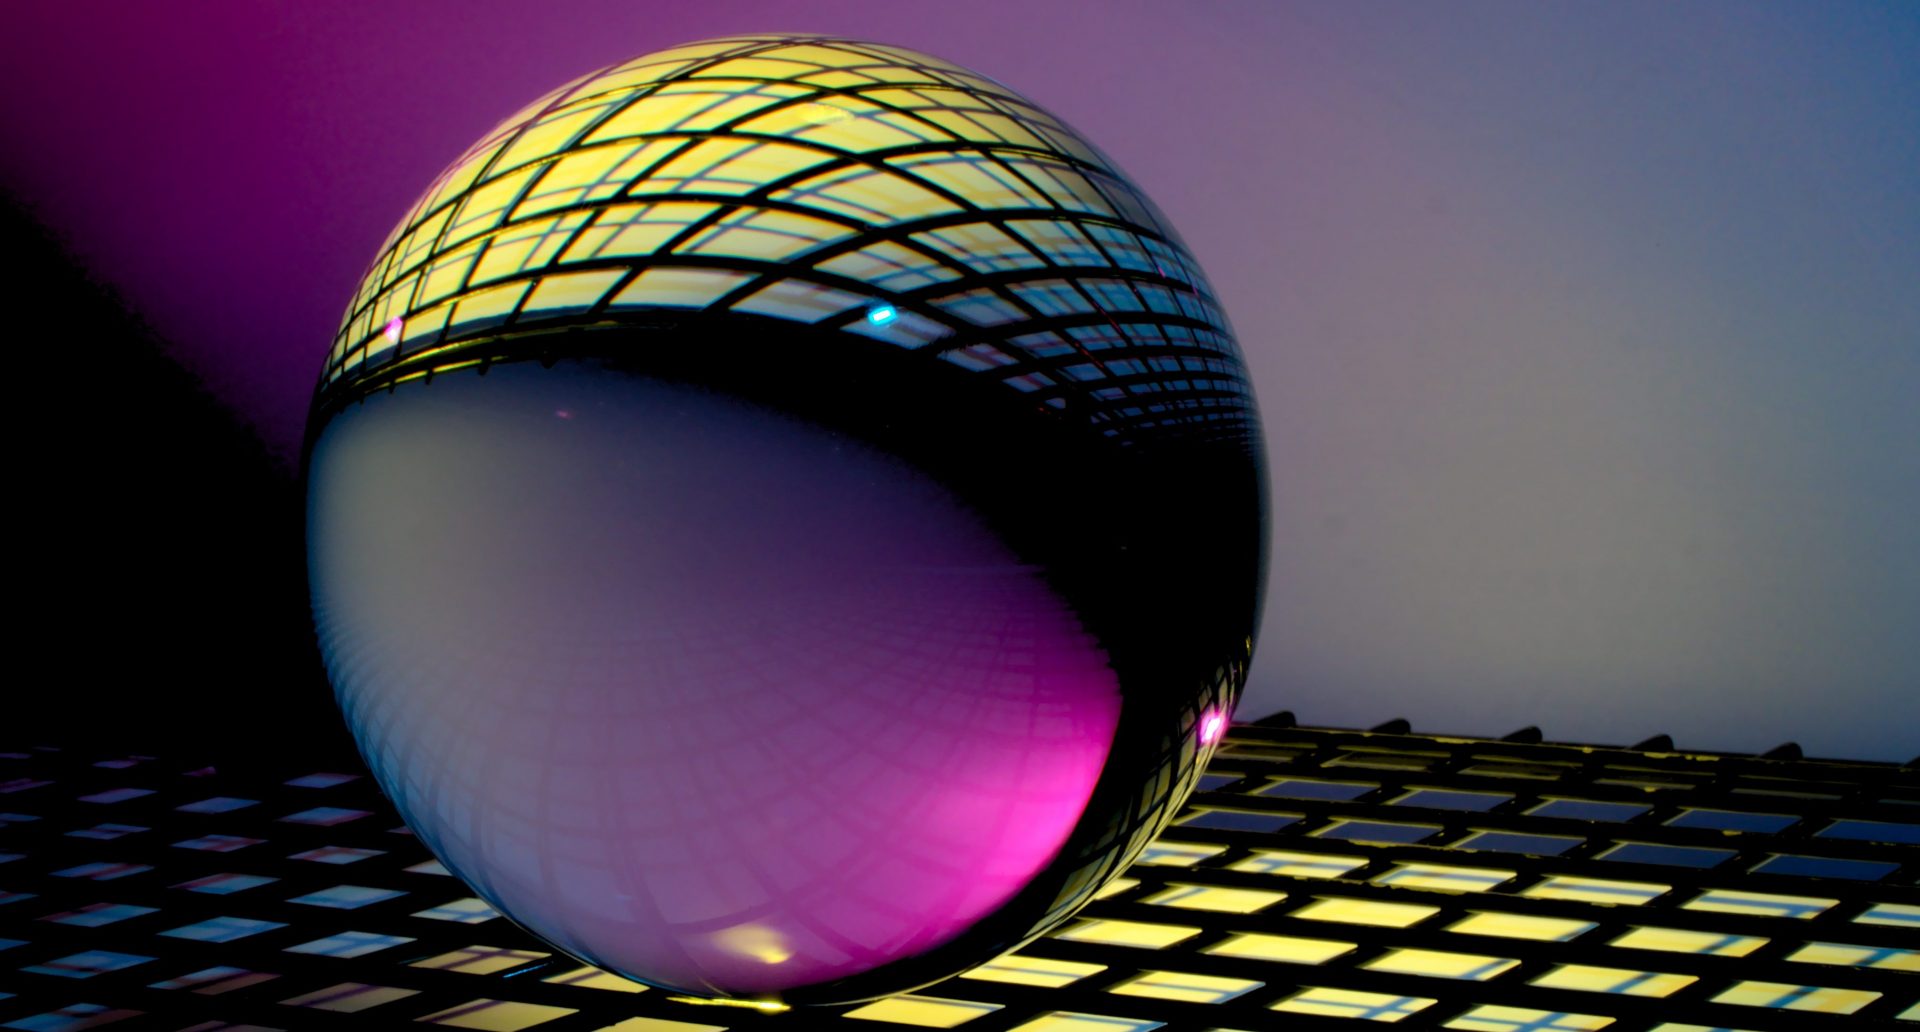 a cool sphere glass reflecting a yellow grid of metals in a dark background